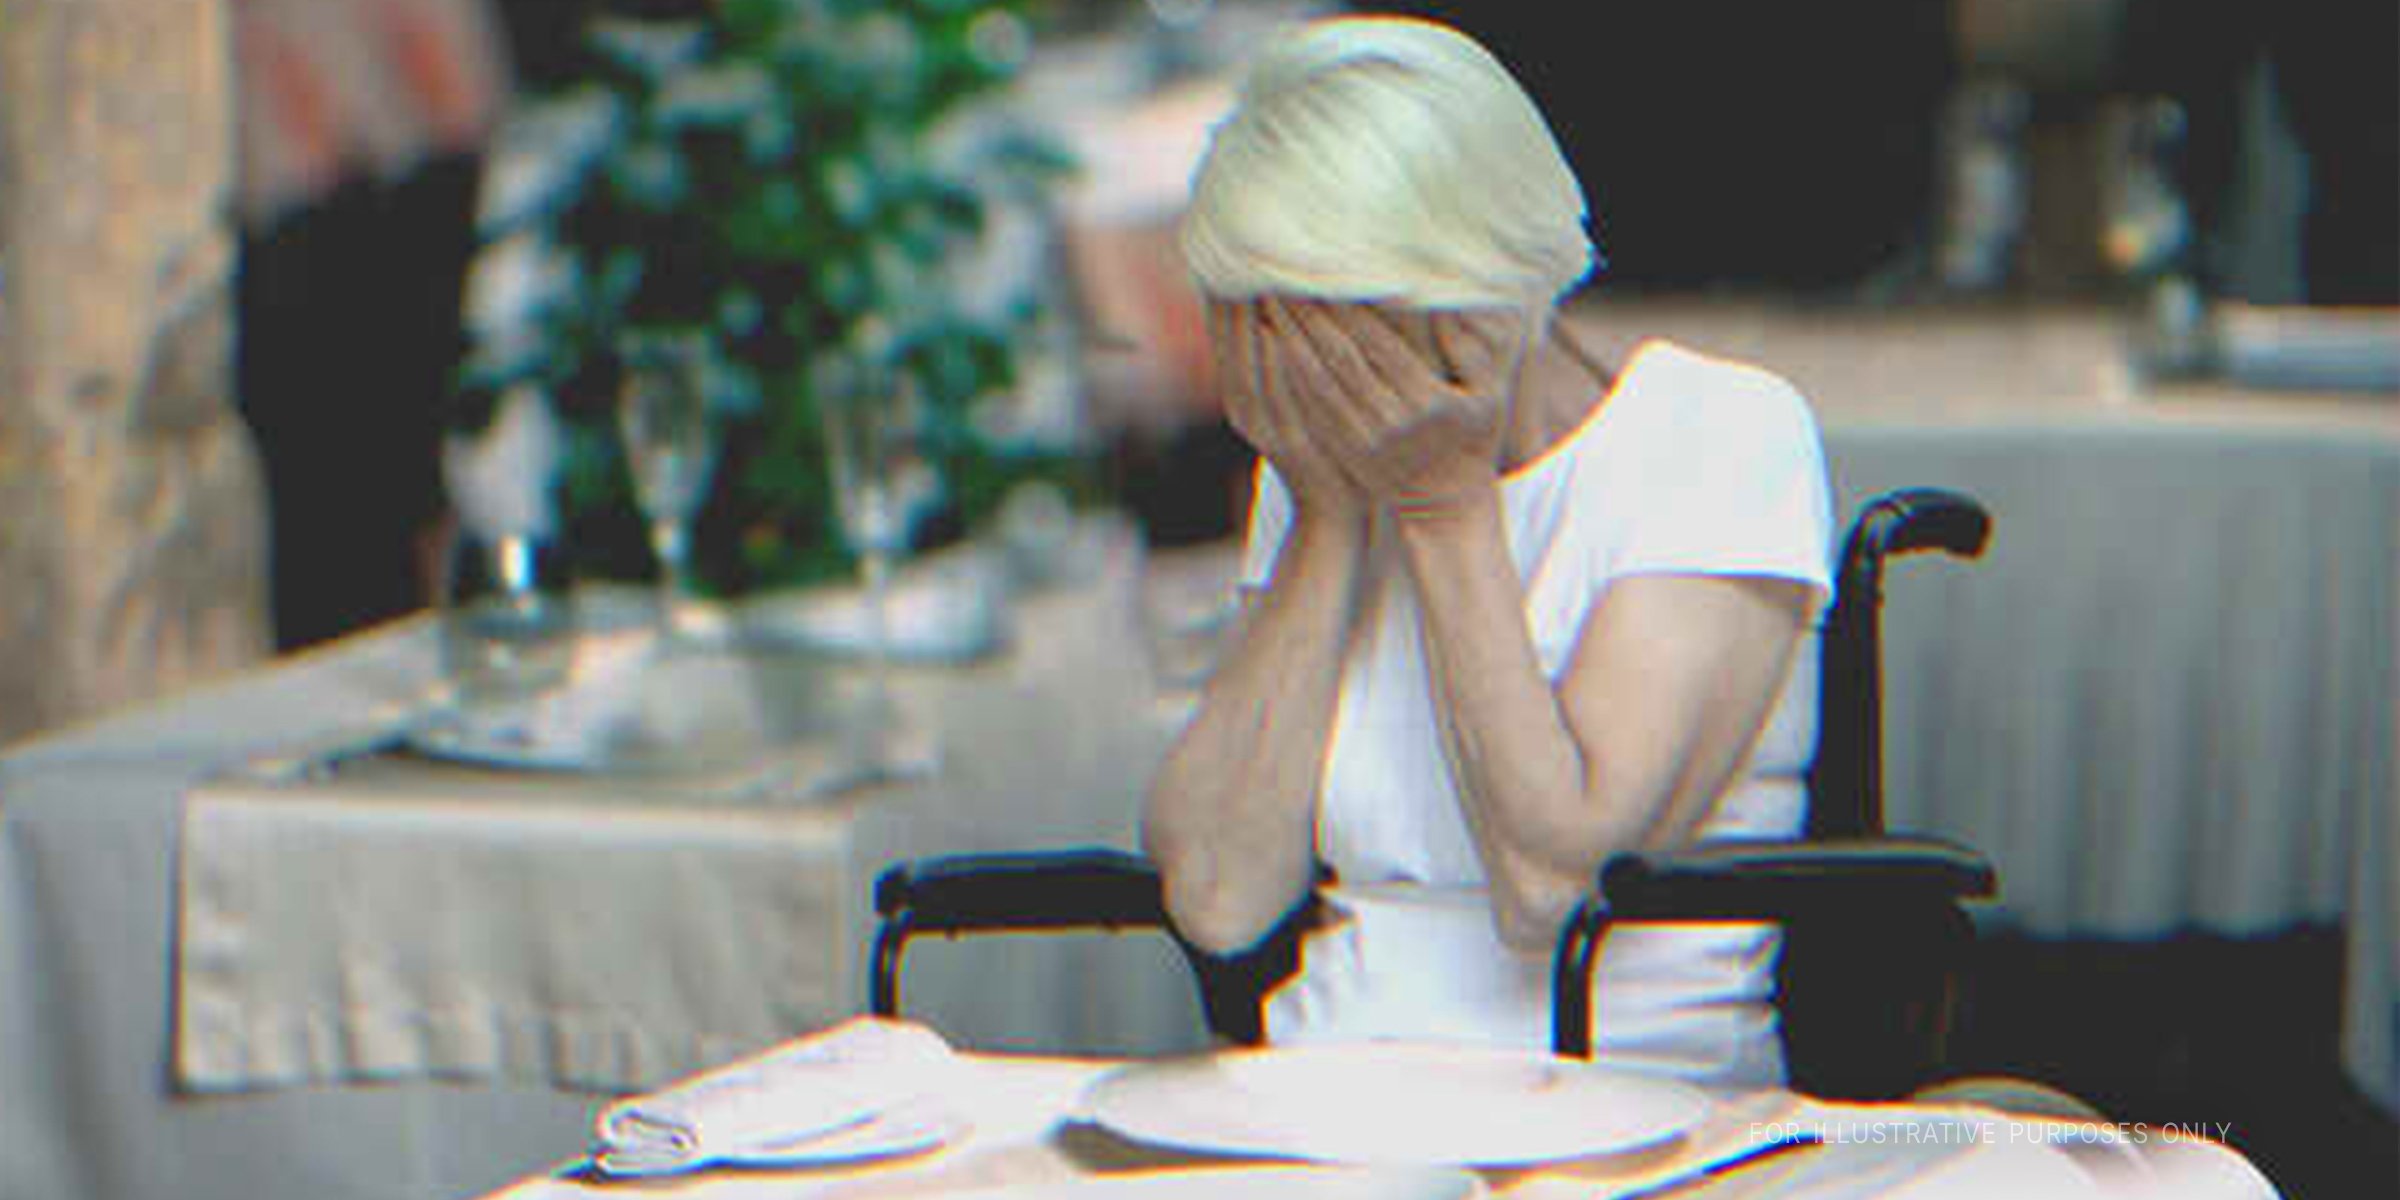 Old woman in a wheelchair crying at a restaurant. | Source: Shutterstock